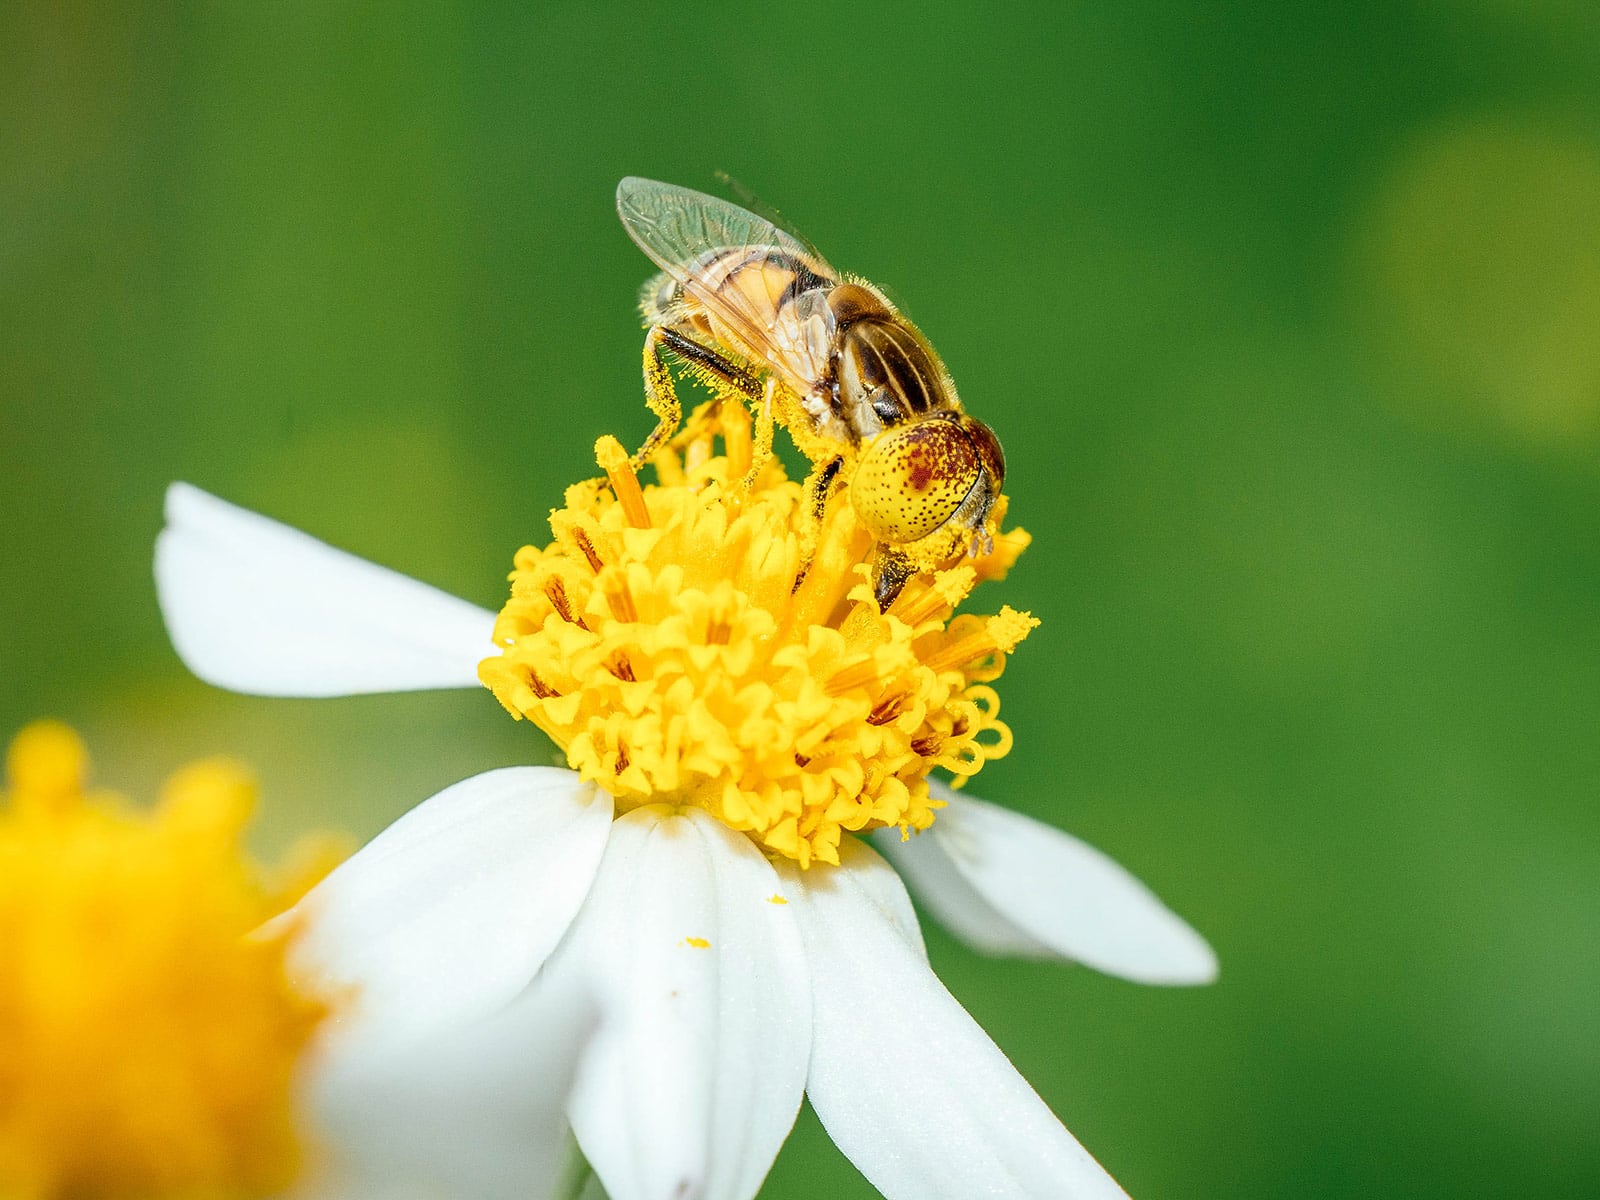 A hoverfly with its legs covered in pollen grains as it feeds on a white flower with a large yellow center